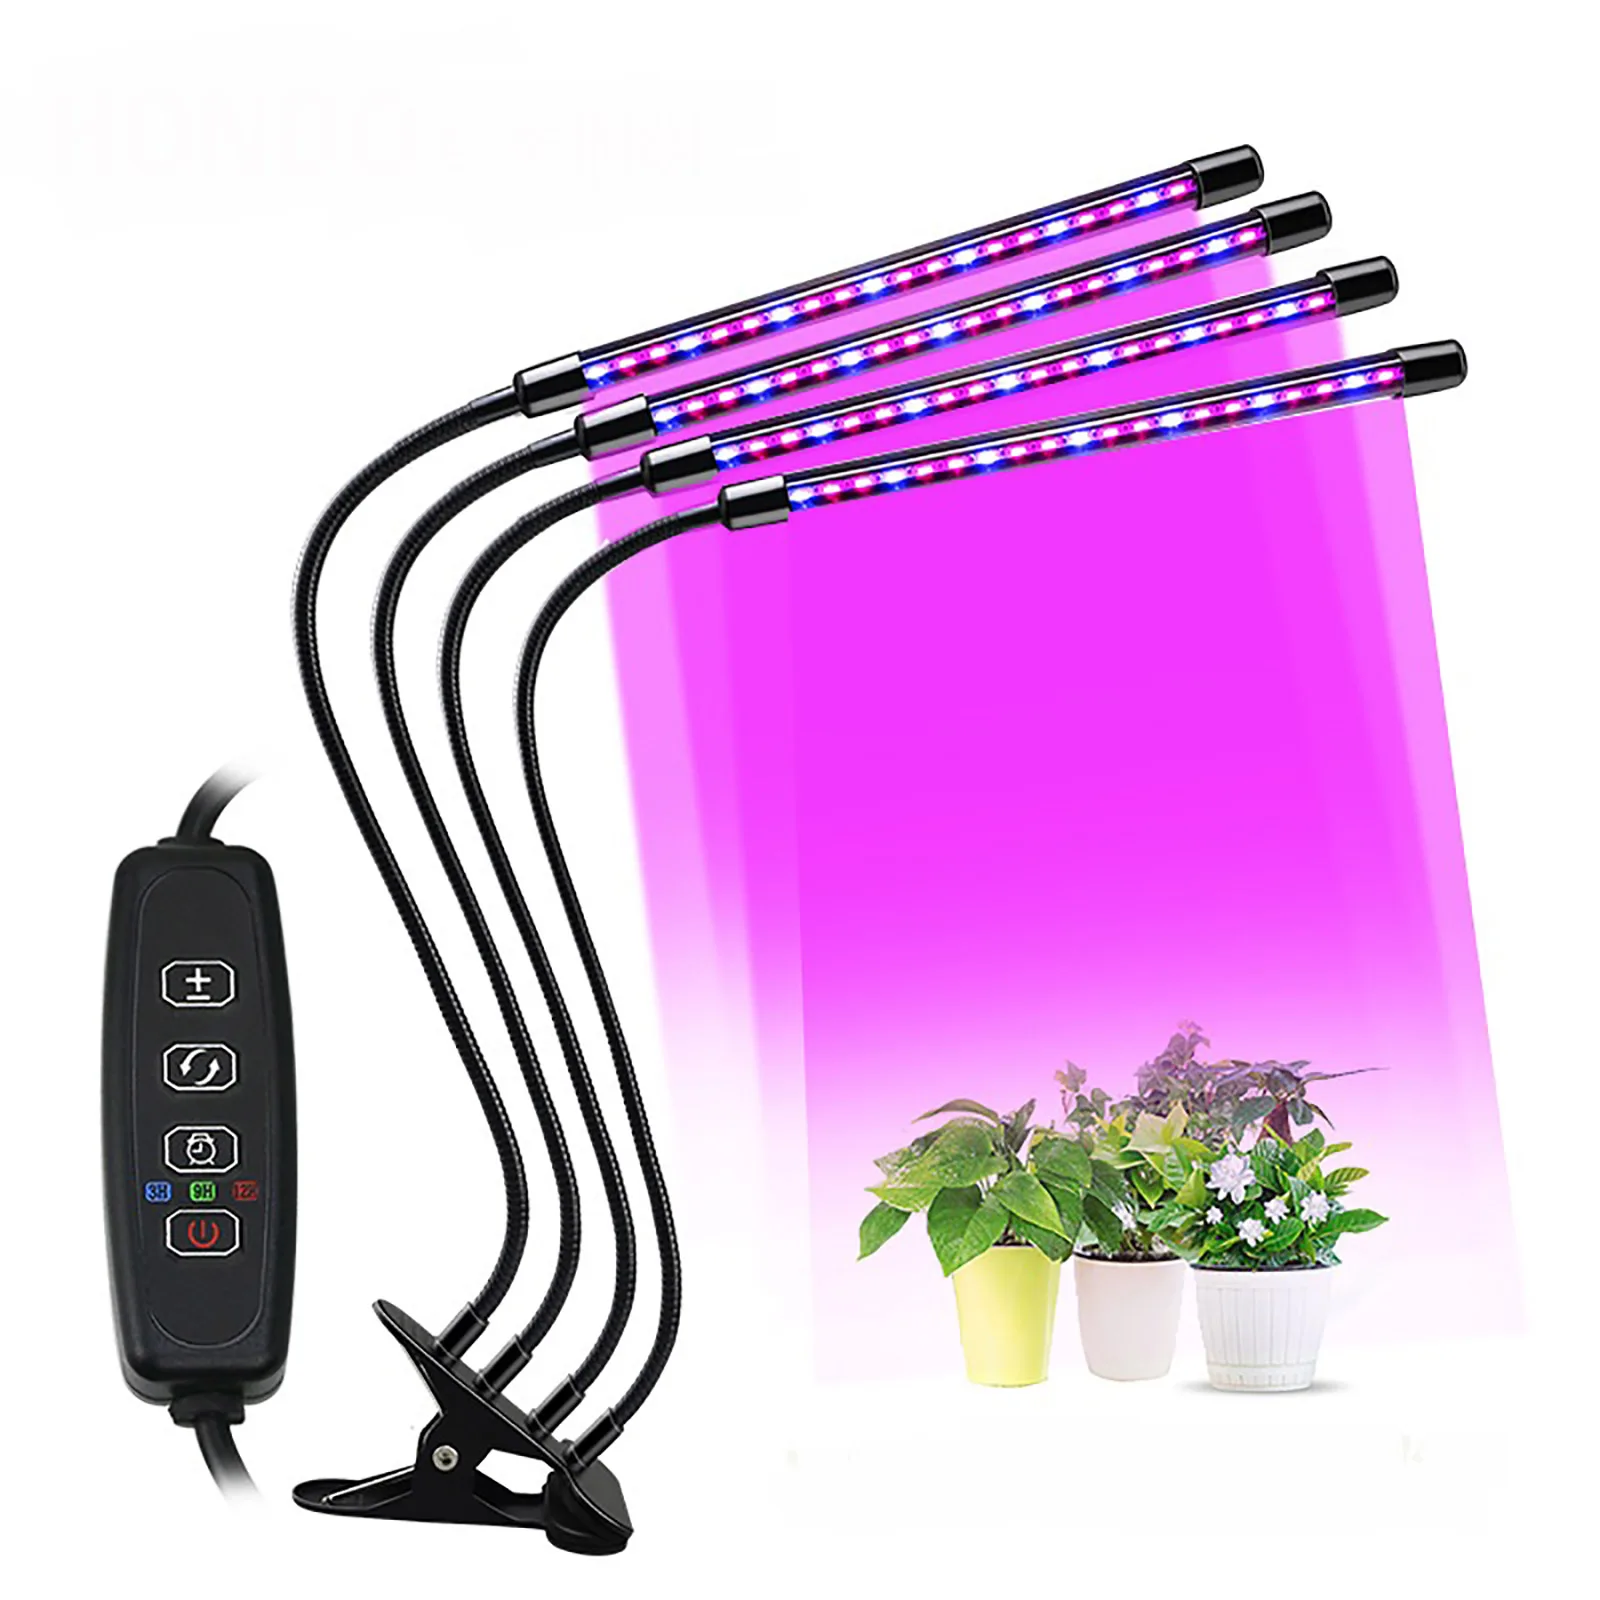 LED Grow Light USB Phyto Lamp Full Spectrum Fitolamp With Control Phytolamp For Plants Seedlings Flower Home Tent